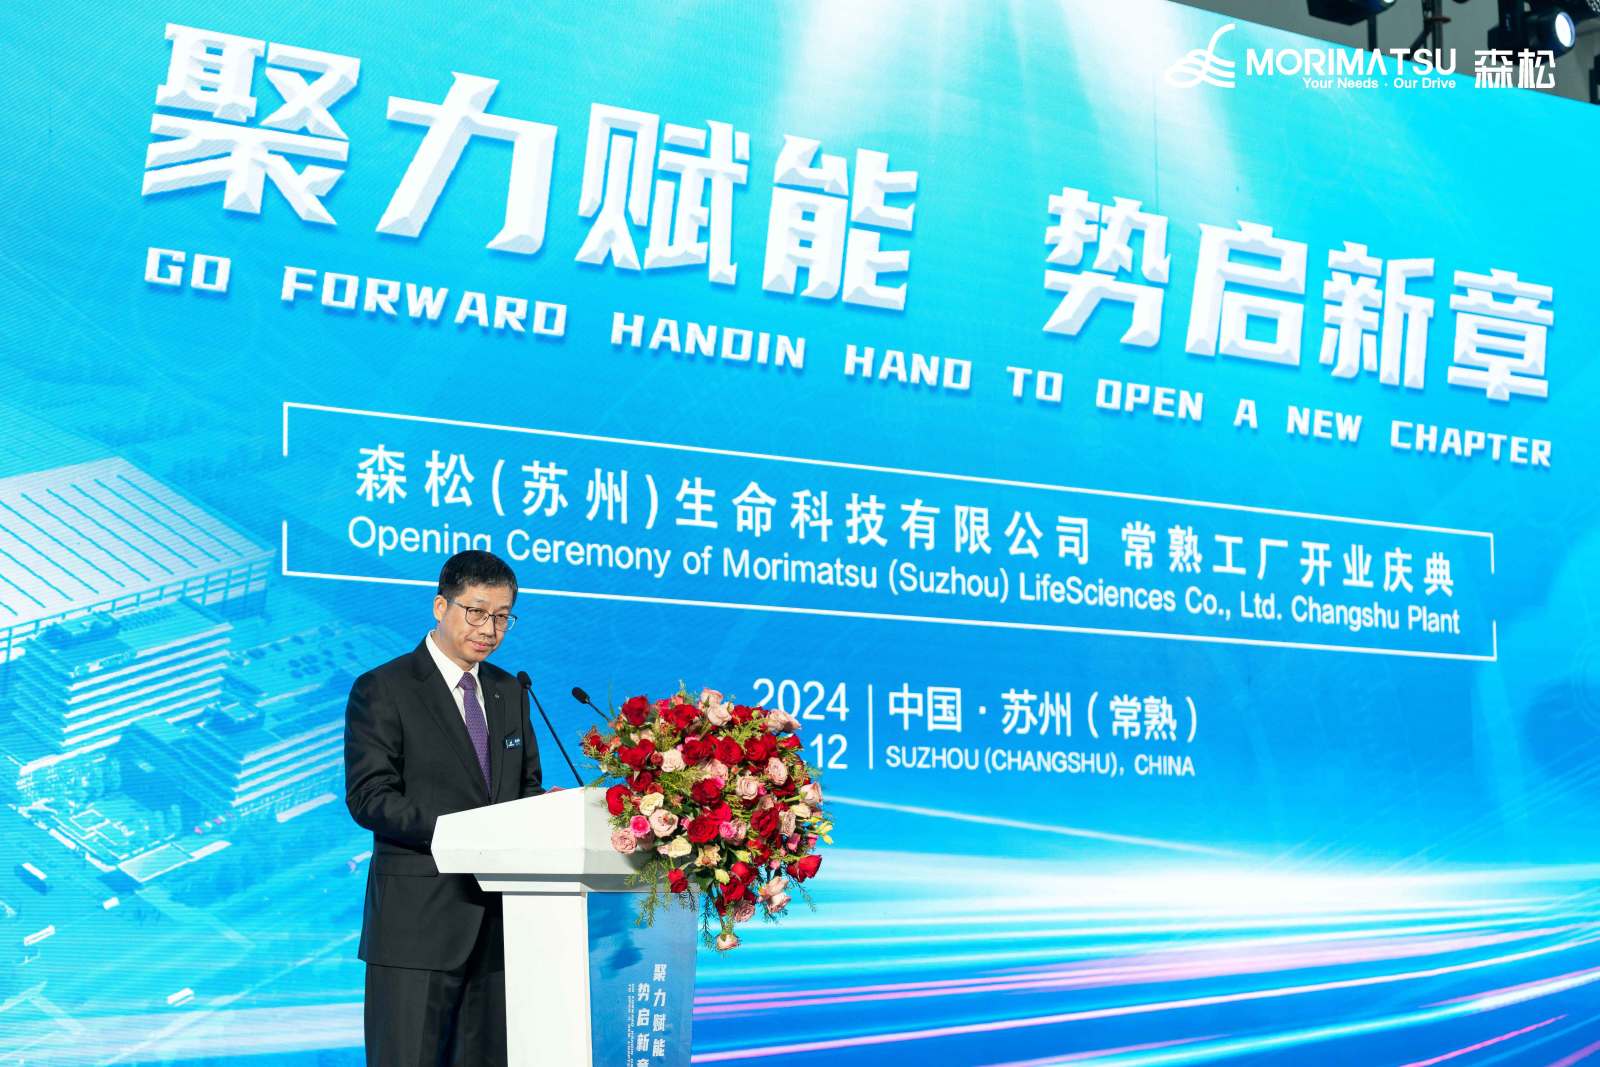 The opening ceremony of Morimatsu Suzhou (Changshu) Production Base was successfully held